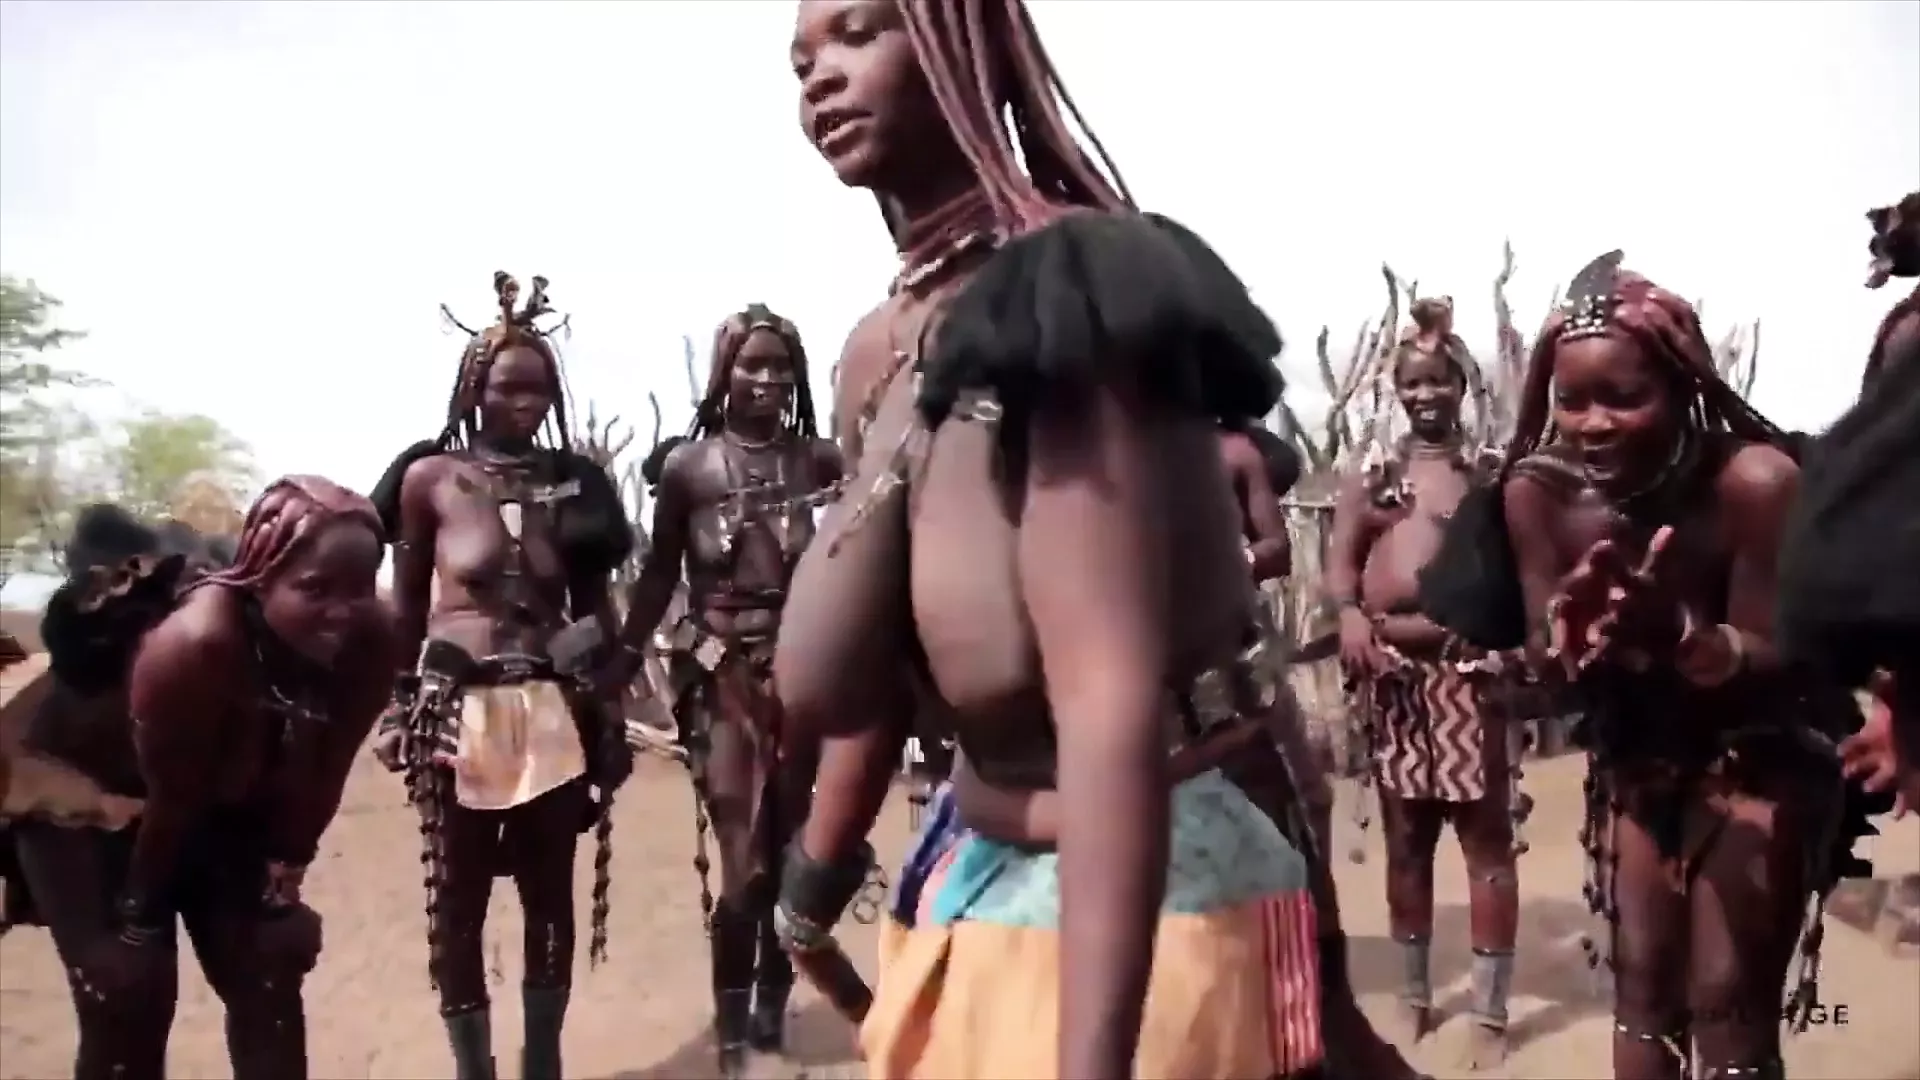 African Himba women dance and swing their saggy tits around pic